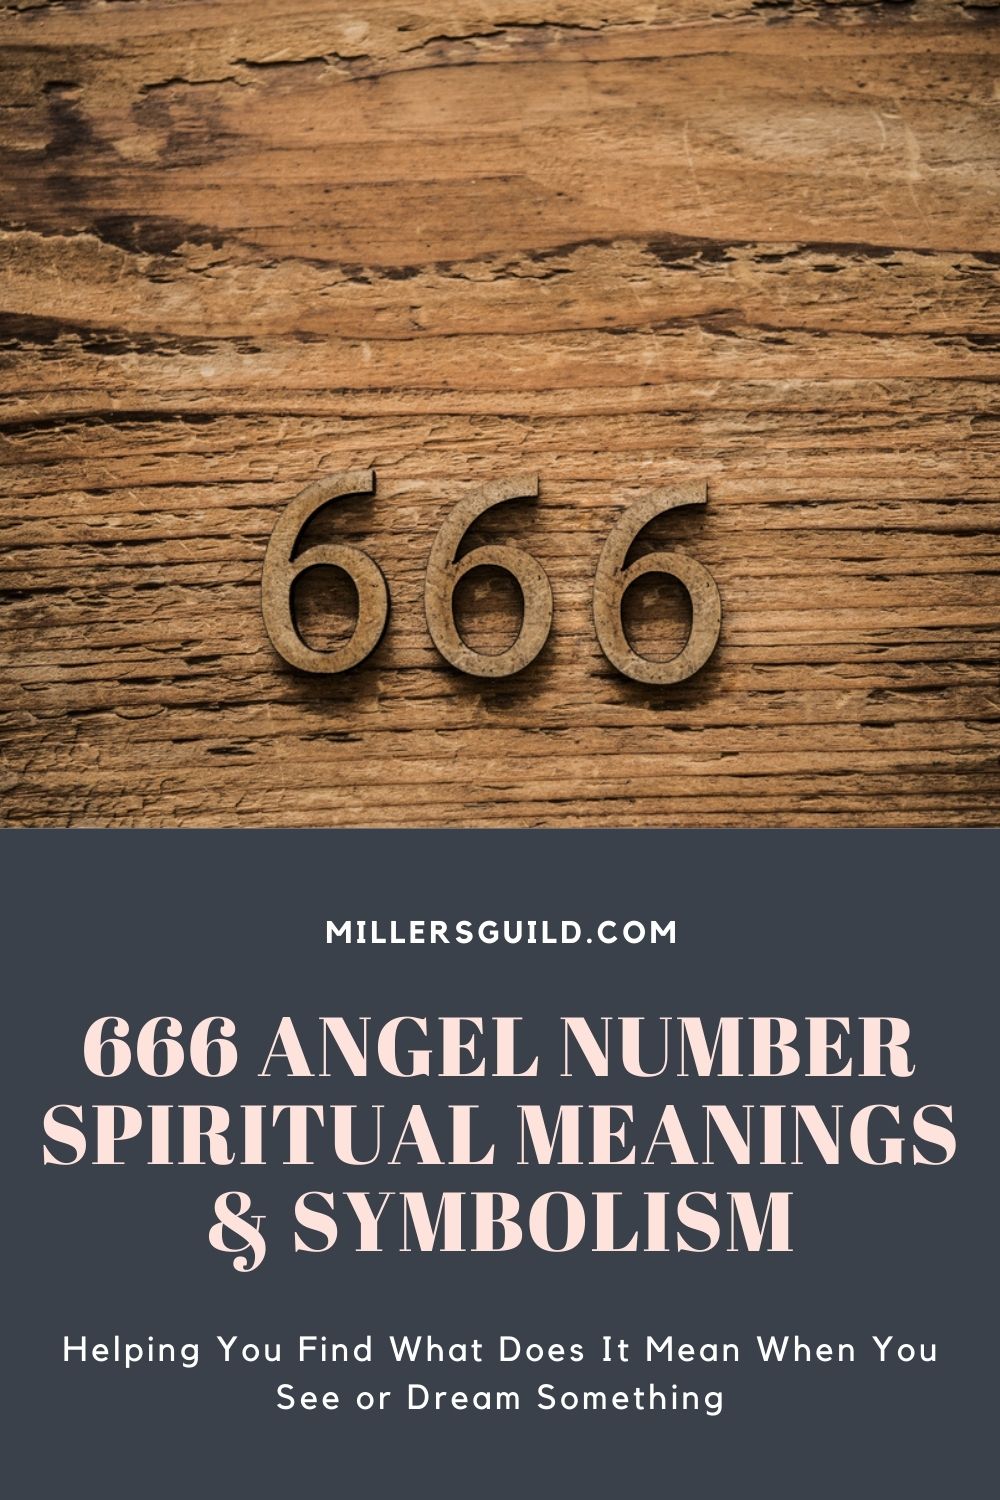 666 Angel Number Spiritual Meanings & Symbolism 2